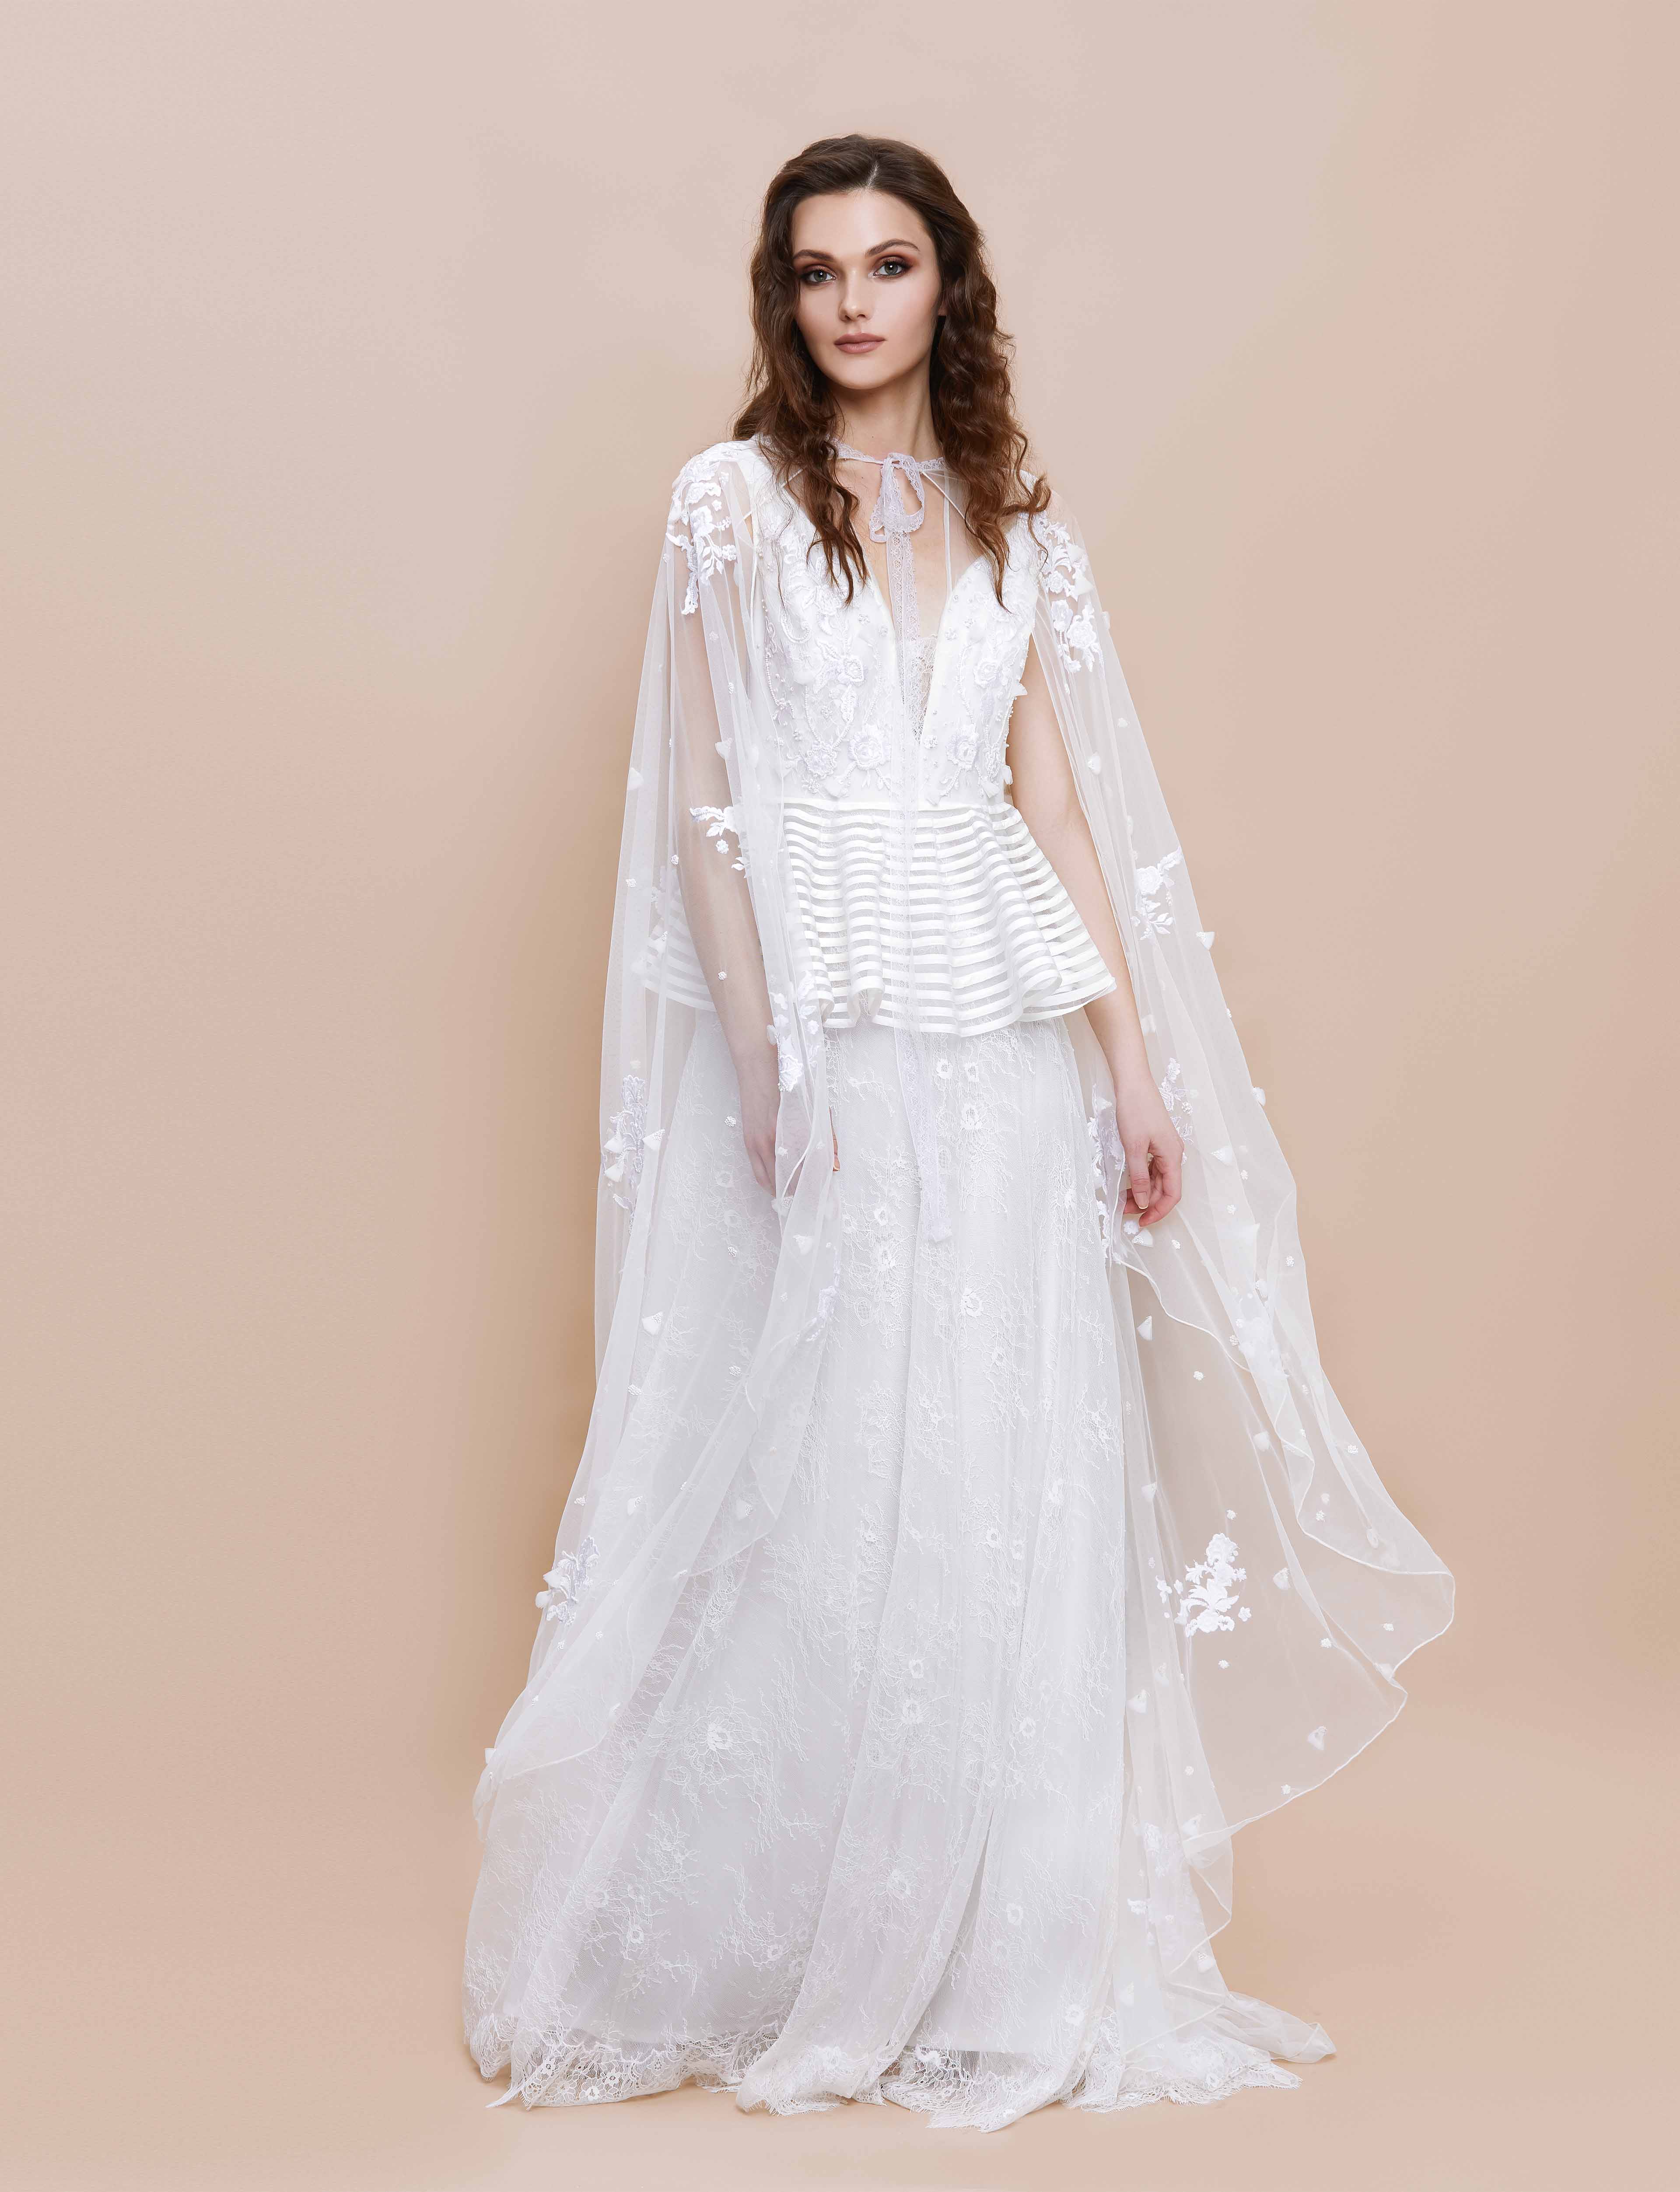 HOW TO PICK THE PERFECT WHITE WEDDING DRESS - The Peacock Magazine